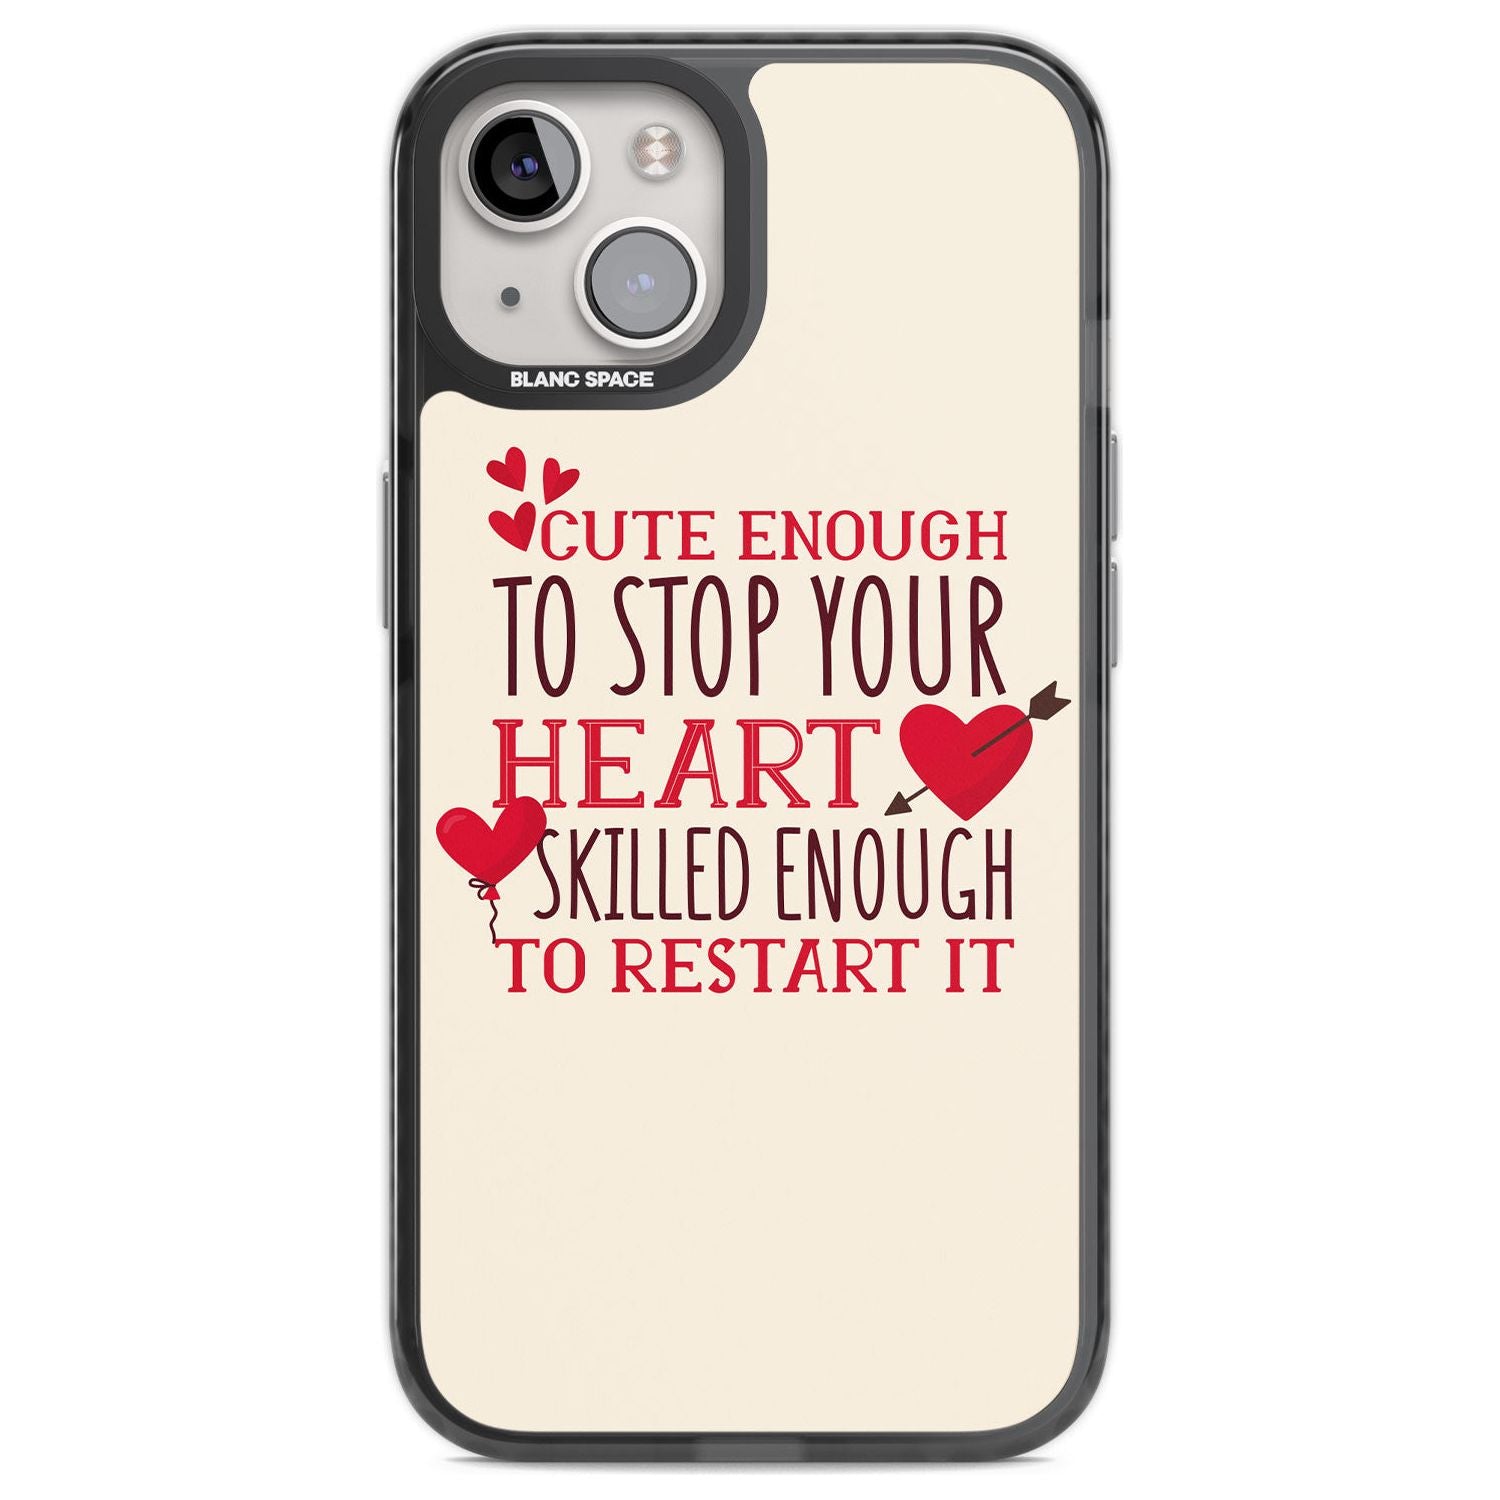 Medical Design Cute Enough to Stop Your Heart Phone Case iPhone 12 / Black Impact Case,iPhone 13 / Black Impact Case,iPhone 12 Pro / Black Impact Case,iPhone 14 / Black Impact Case,iPhone 15 Plus / Black Impact Case,iPhone 15 / Black Impact Case Blanc Space